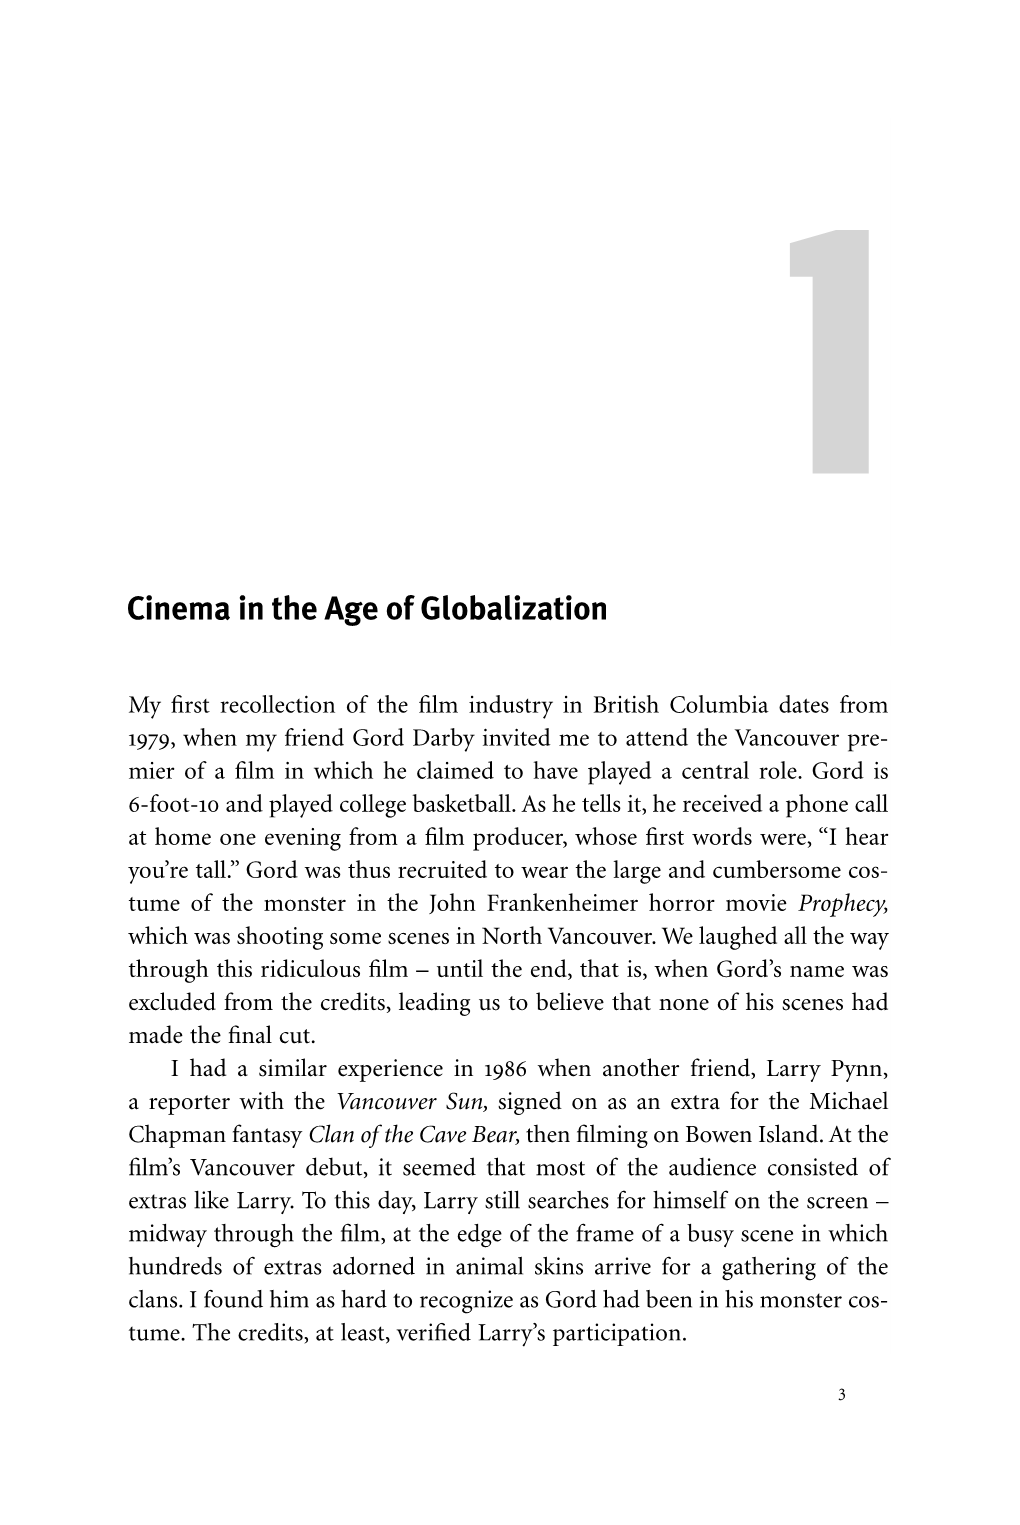 Cinema in the Age of Globalization